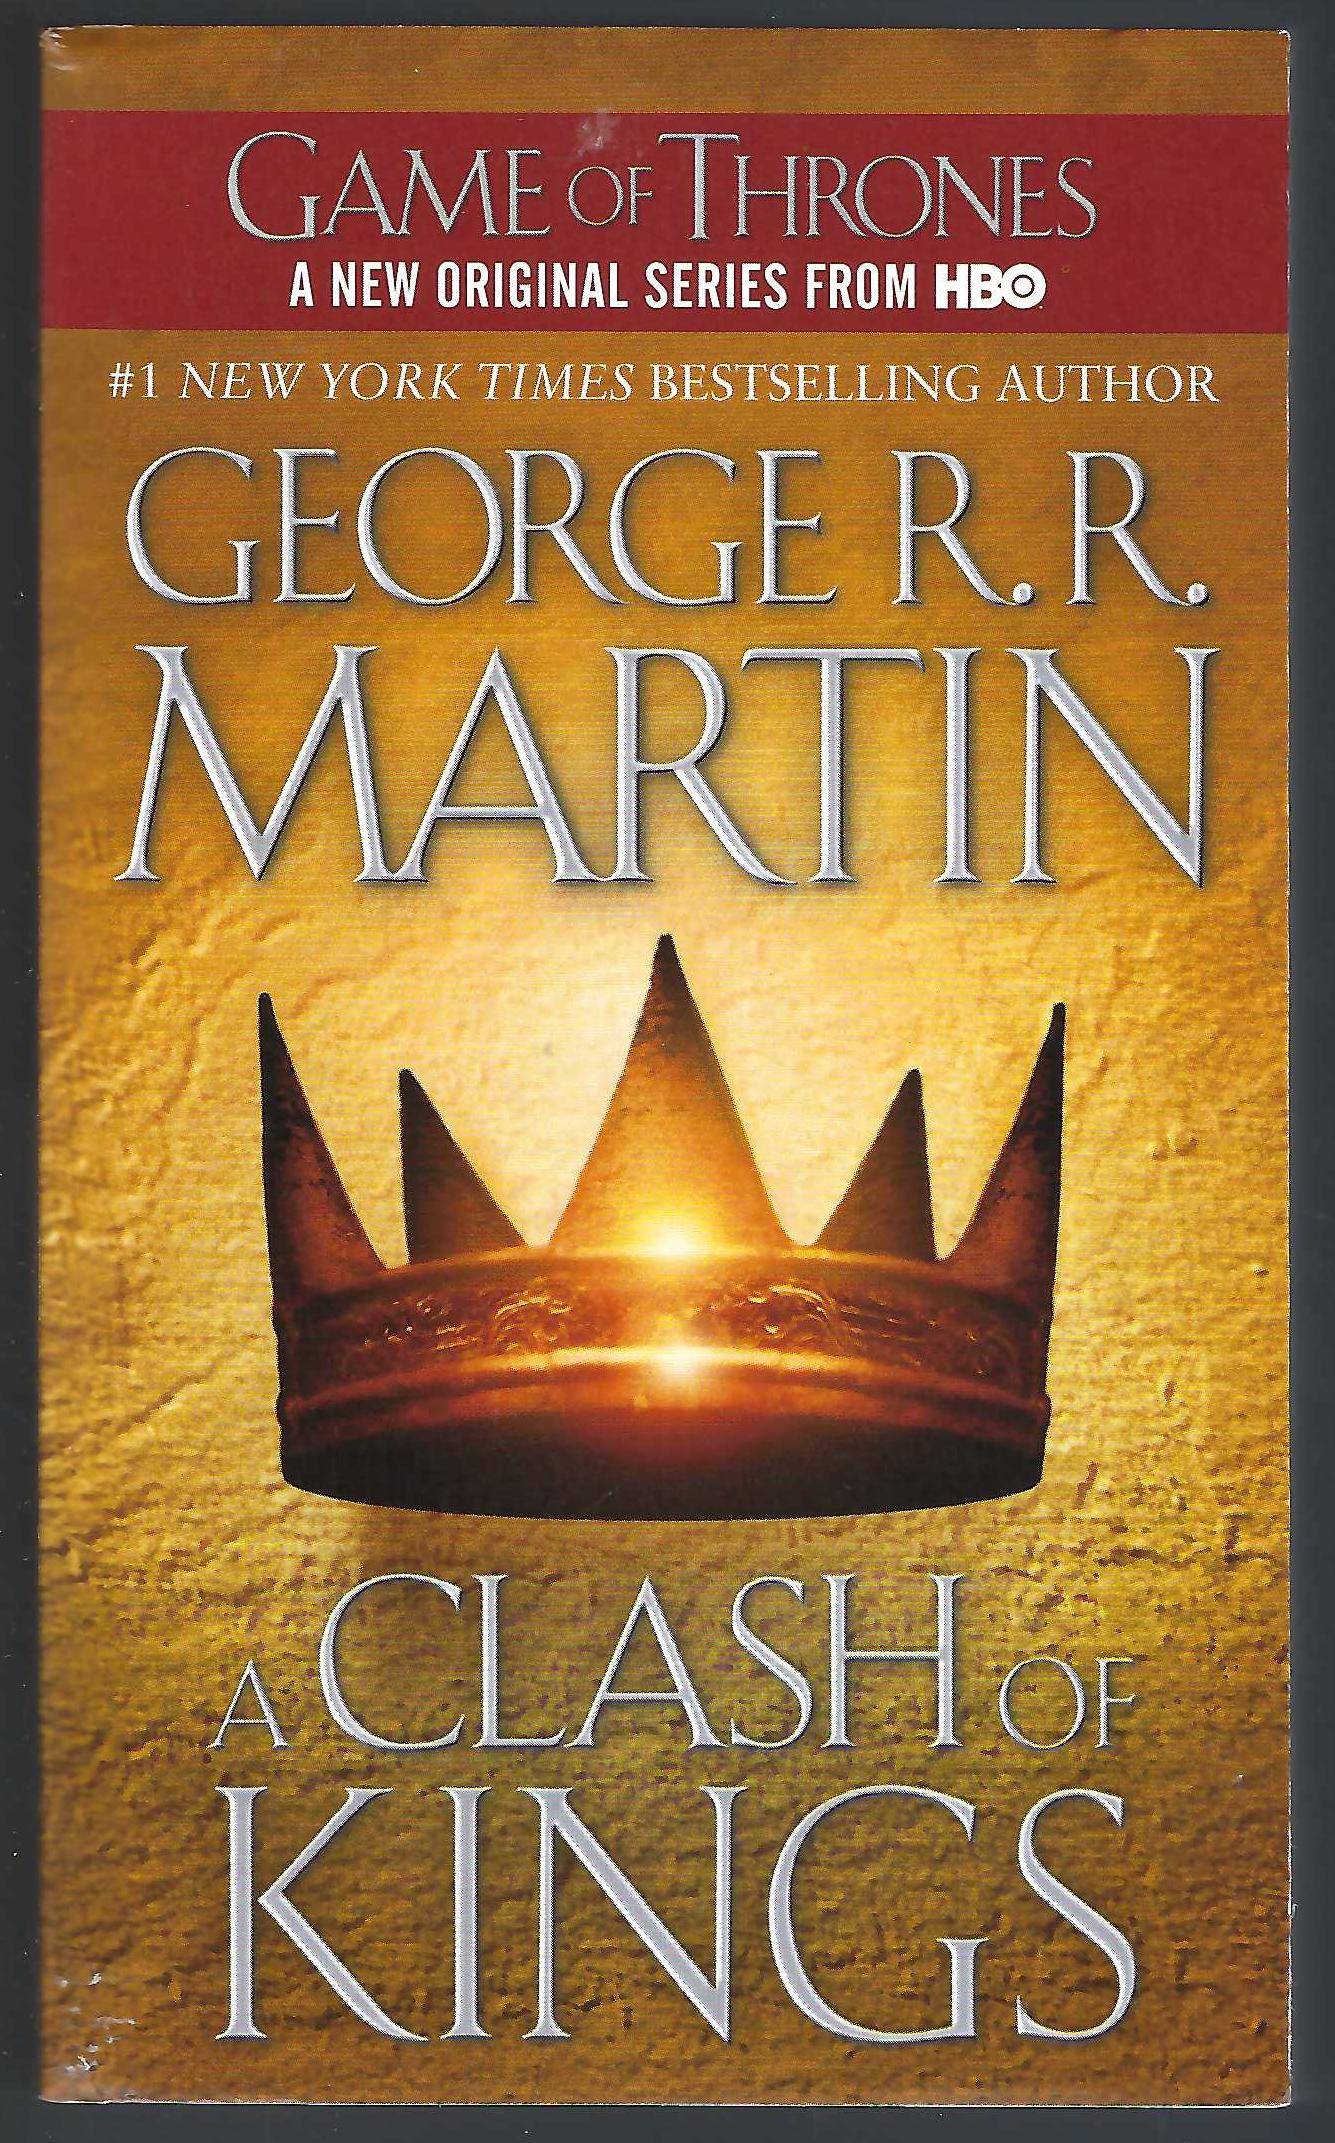 Clash of Kings (A Song of Ice and Fire #2) by George R. R. Martin